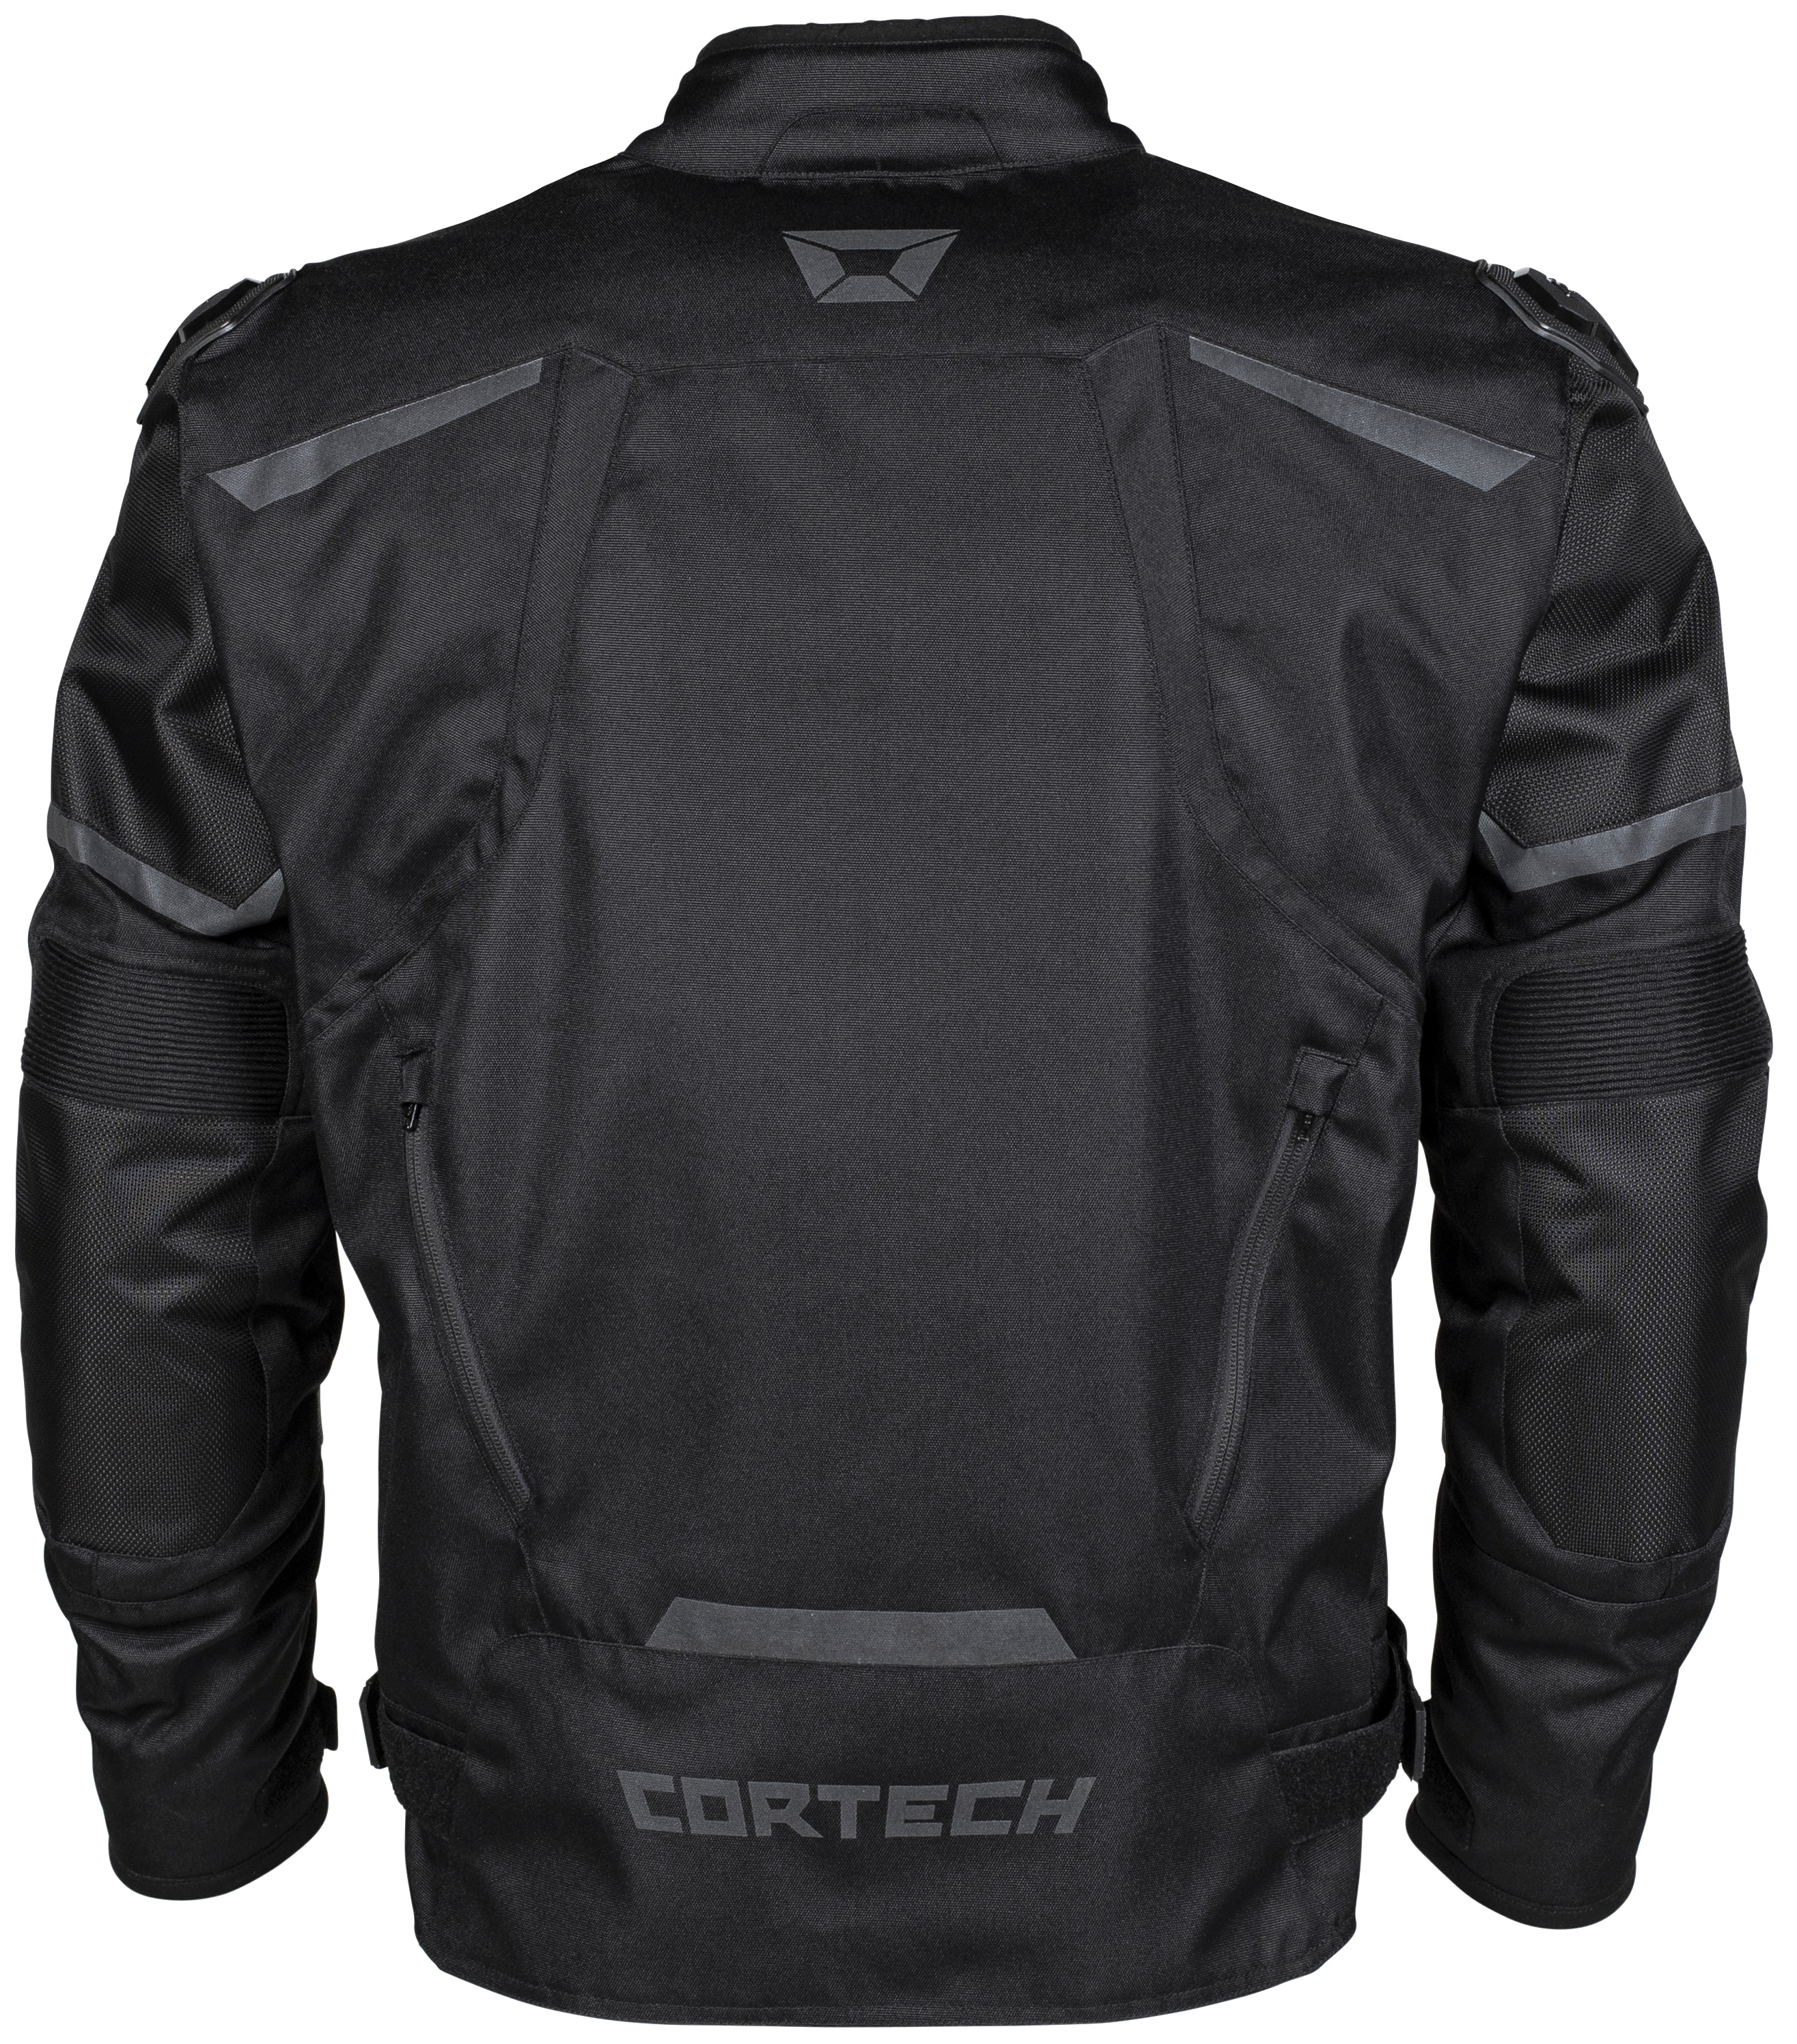 Hyper-Tec Armored Motorcycle Riding Jacket Black Large-Tall - Click Image to Close